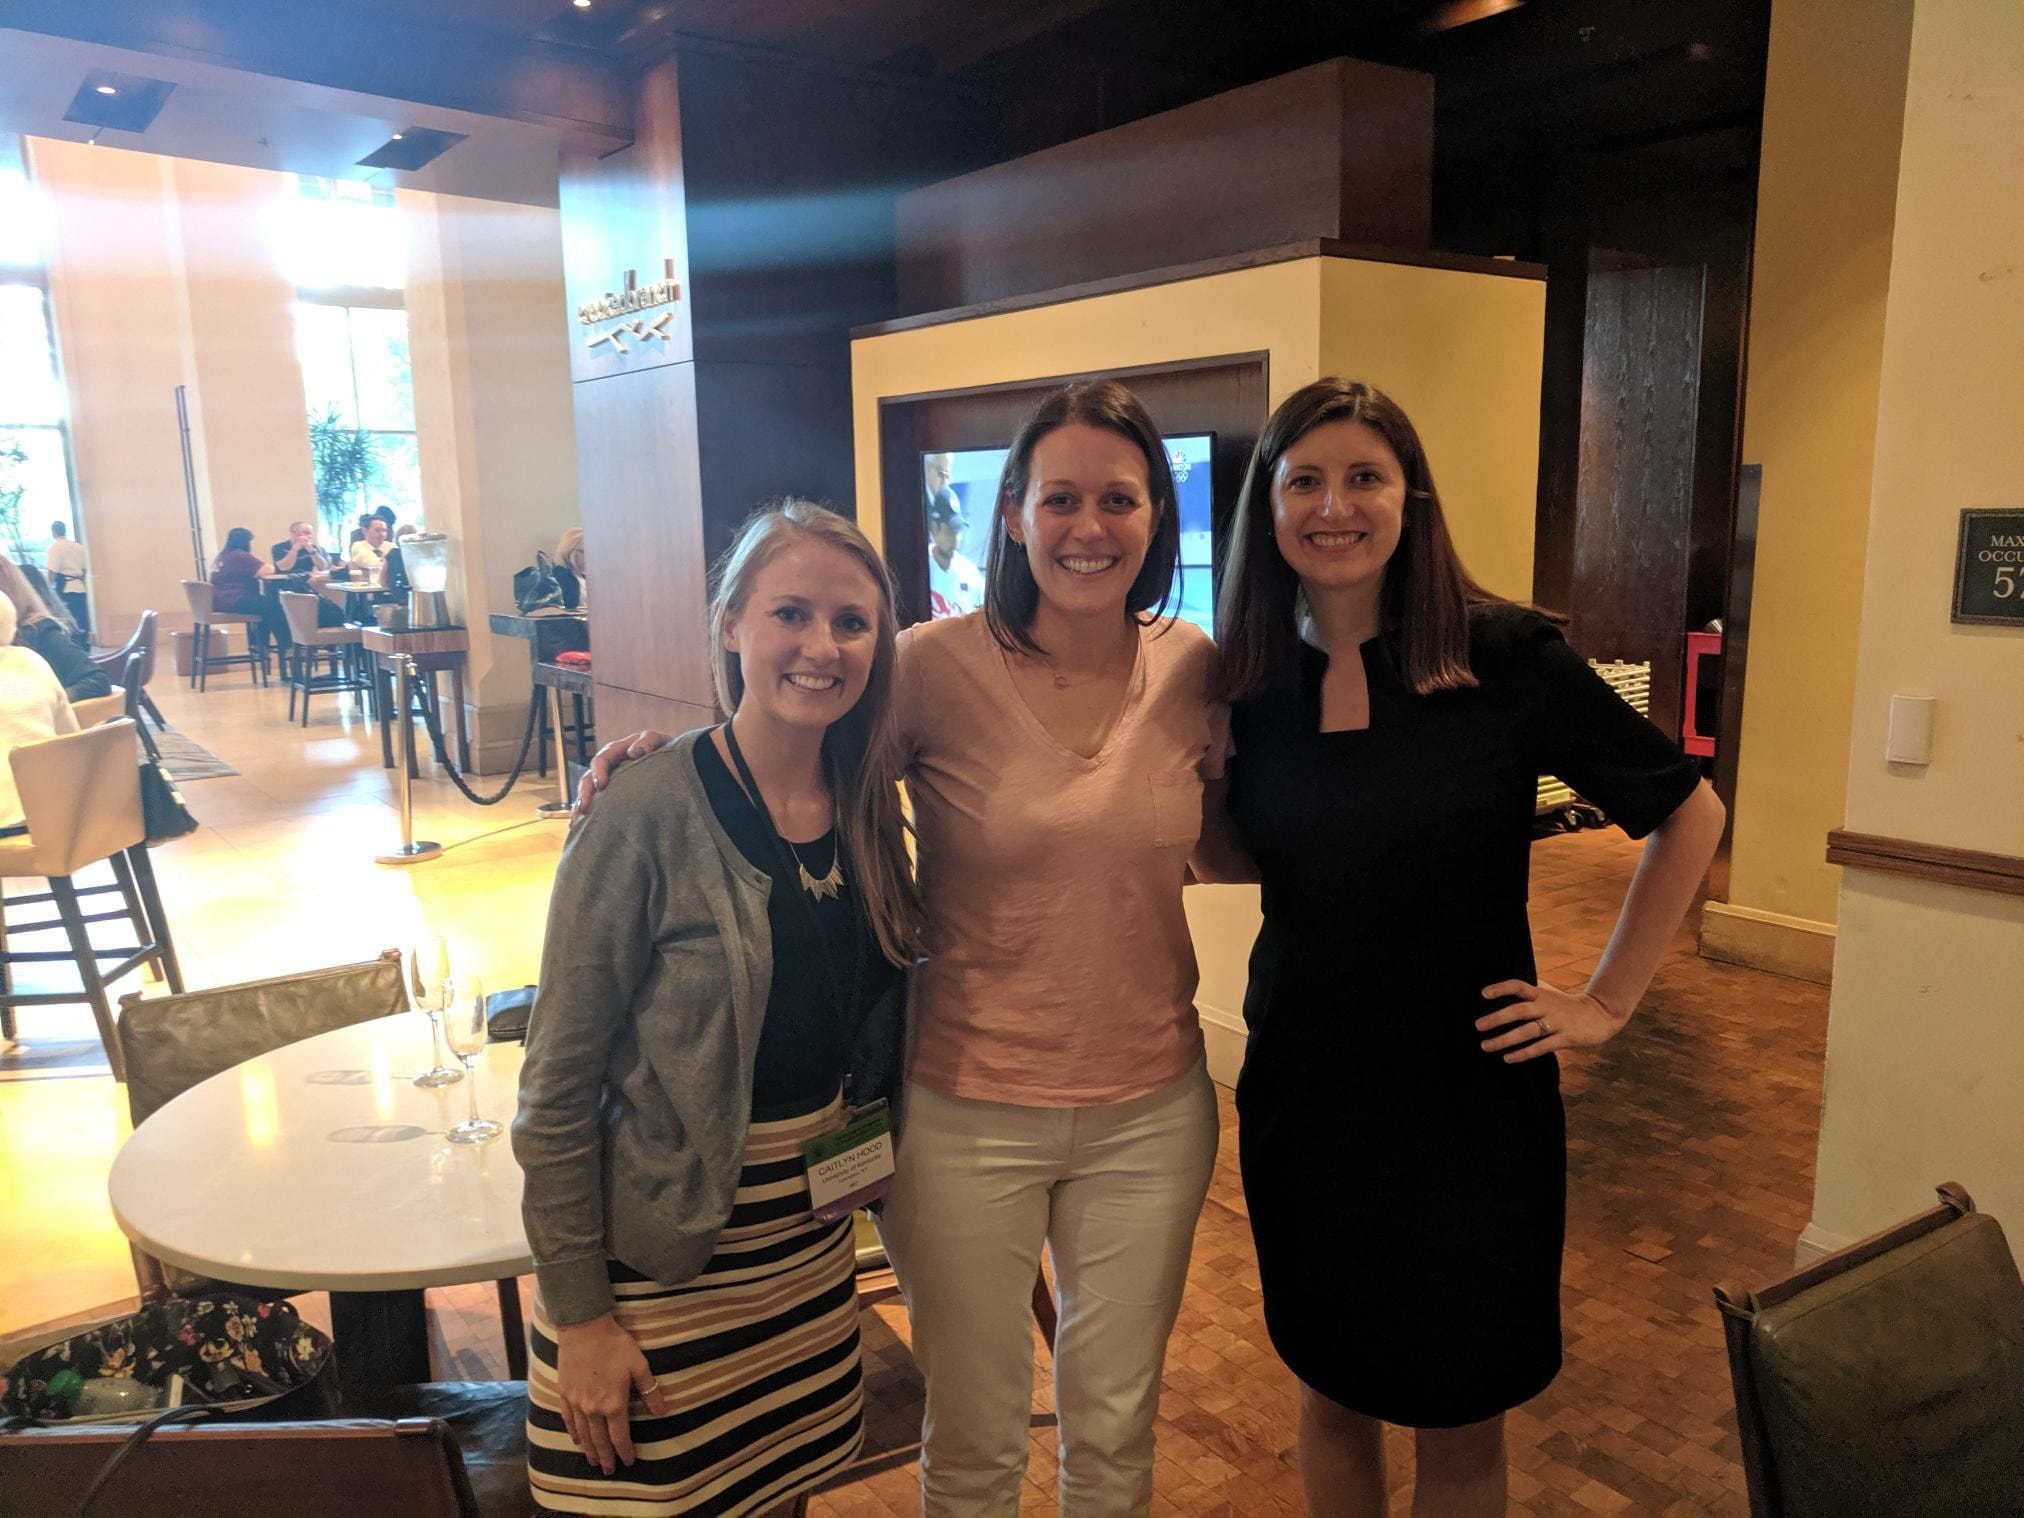 Caitlyn Hood with mentors Dr. McClure and Dr. Tomko at CPDD 2019